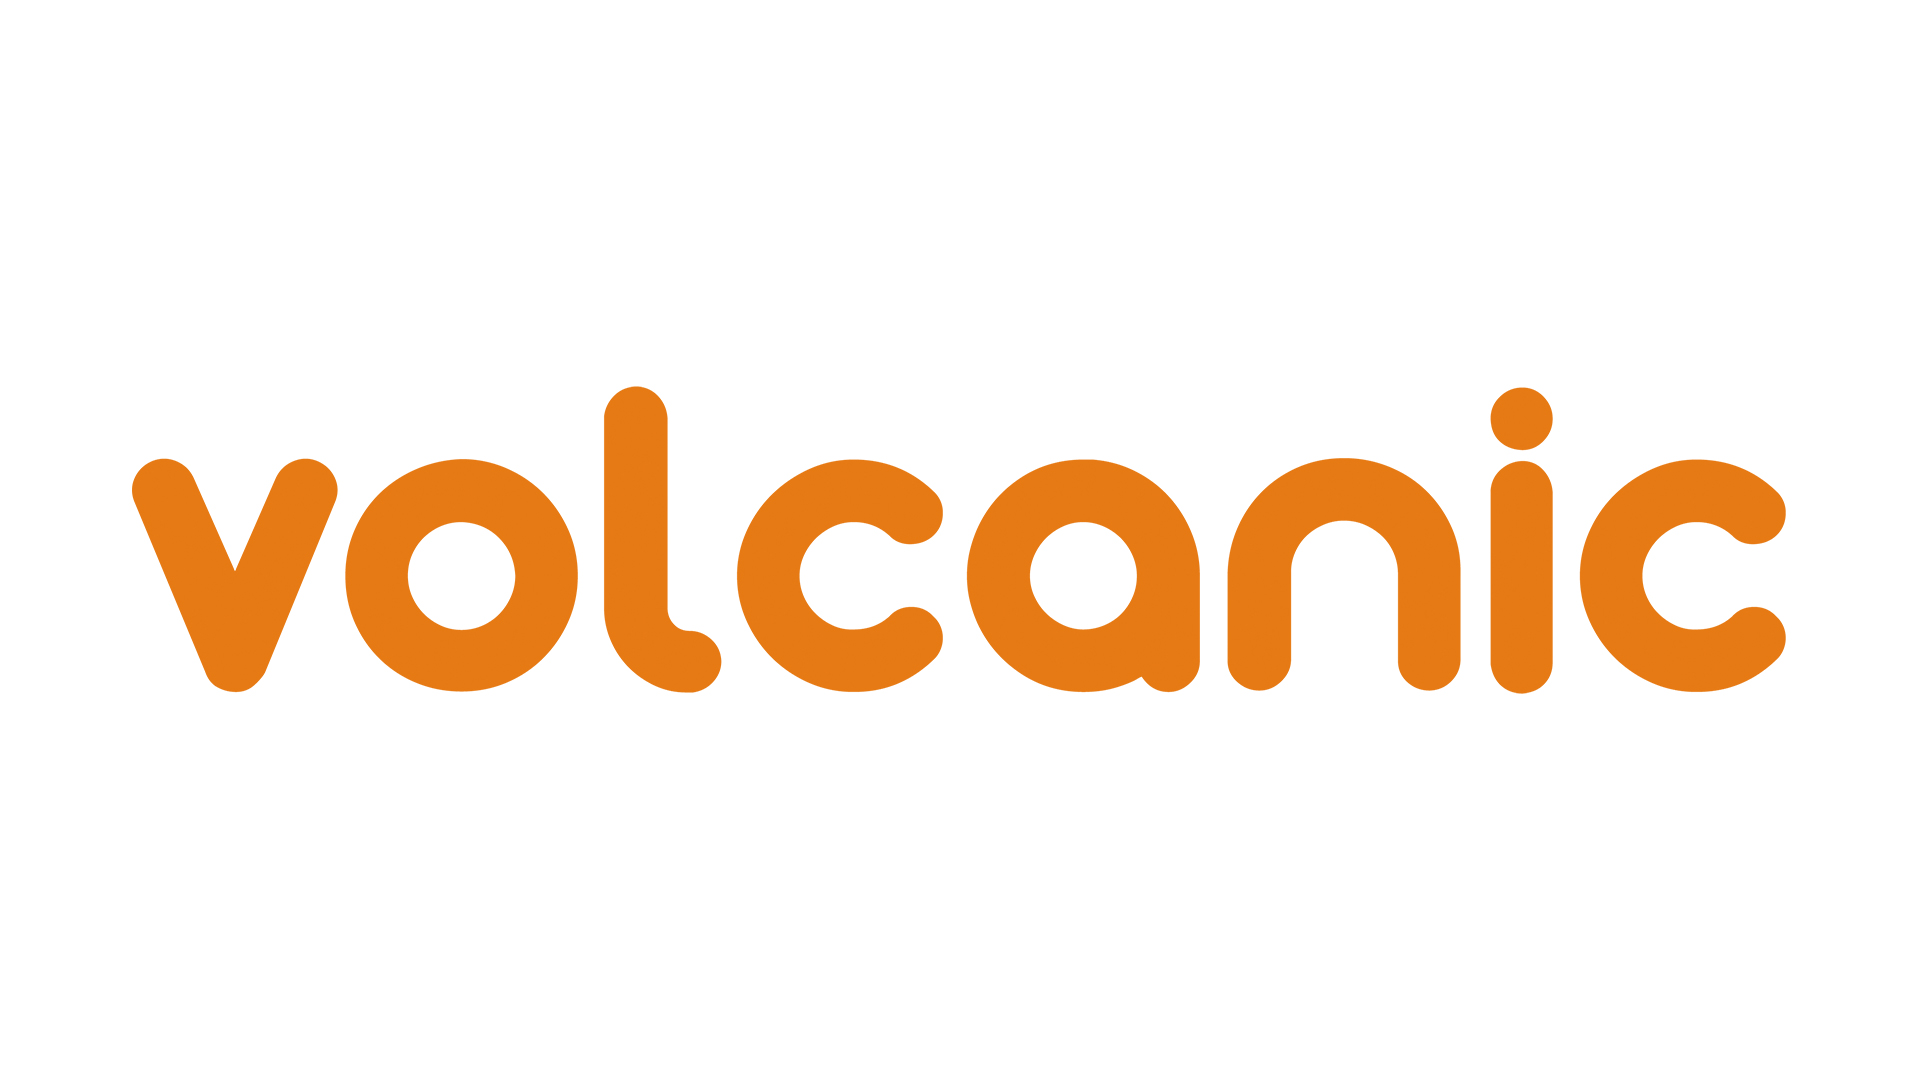 Volcanic Join The Recruitment Network as a Silver Partner